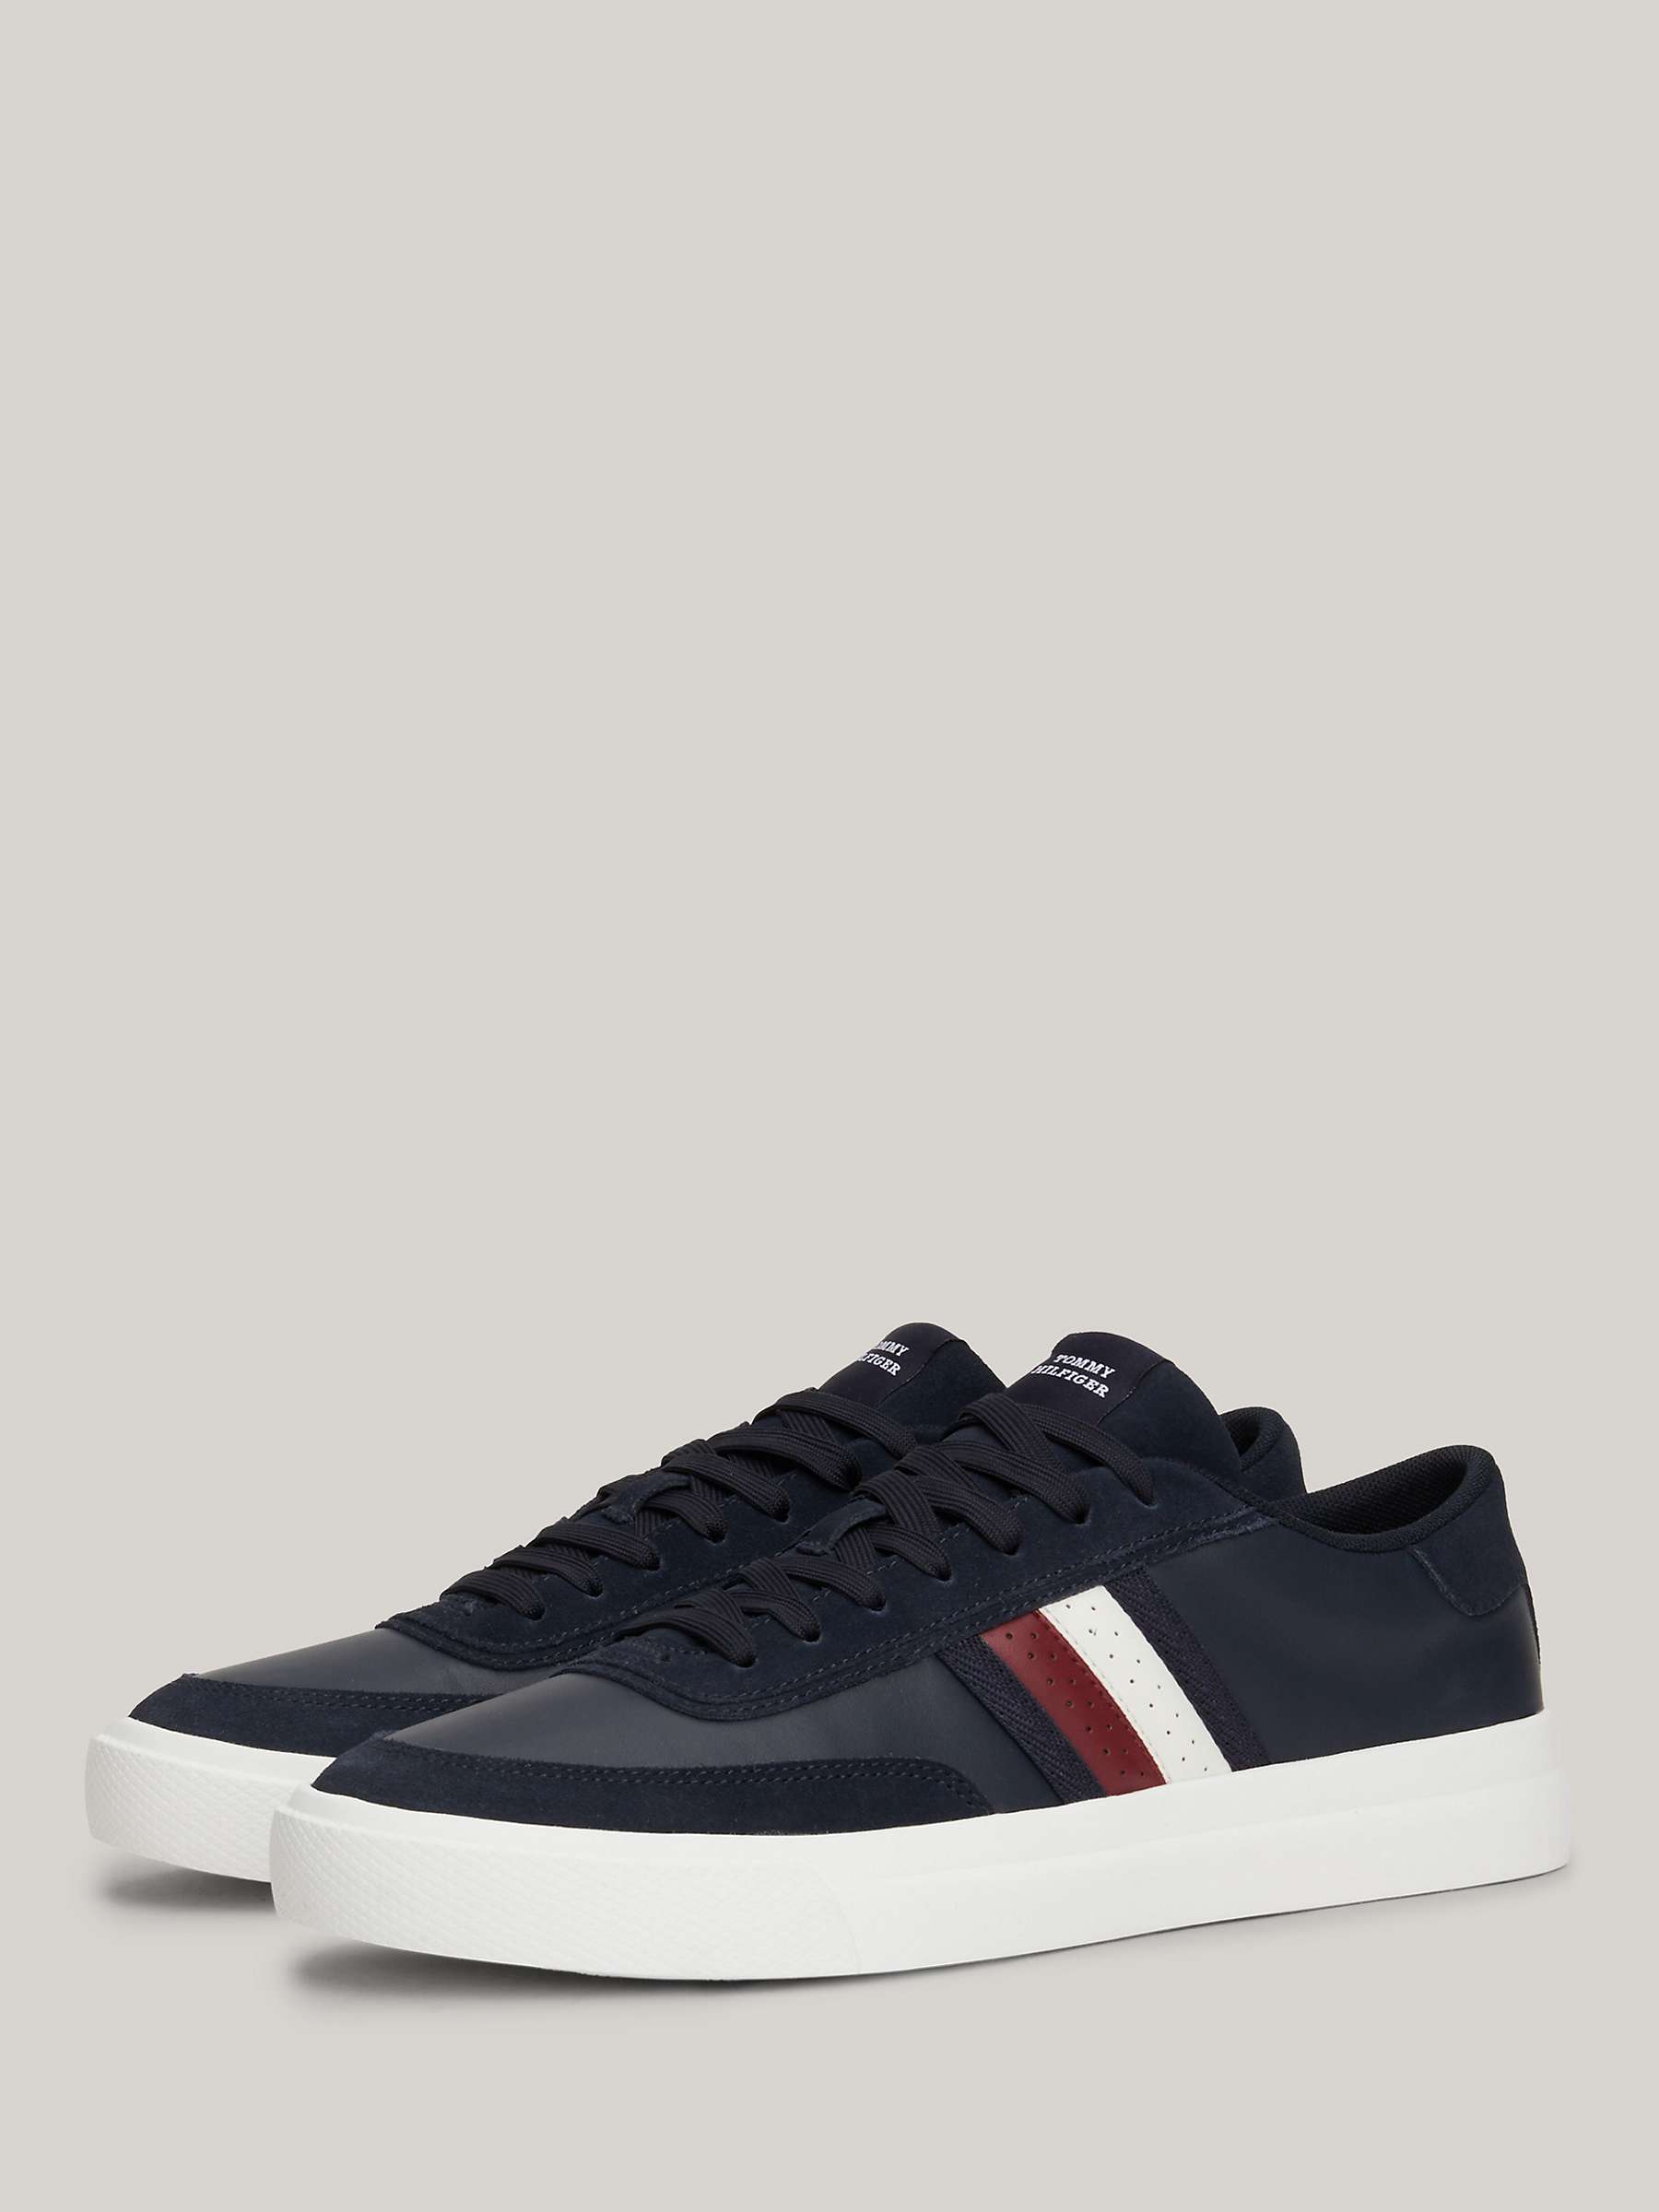 Buy Tommy Hilfiger Cupsole Leather Trainers, Desert Sky Online at johnlewis.com